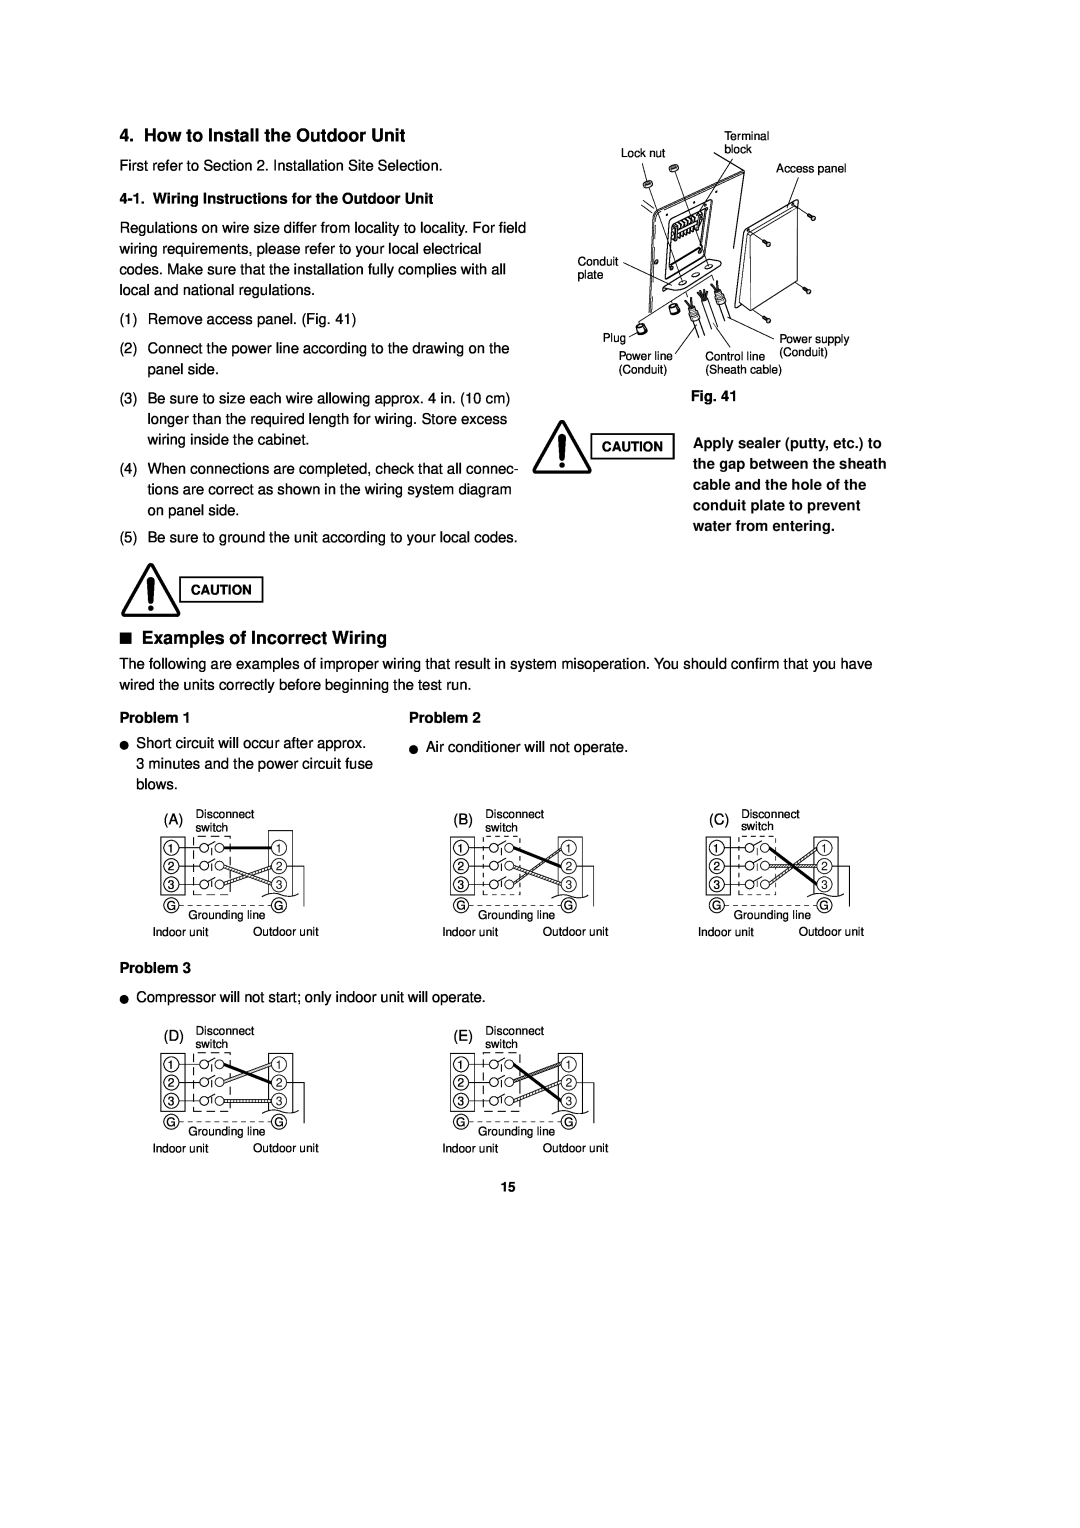 Sanyo CH0951 How to Install the Outdoor Unit, Examples of Incorrect Wiring, Wiring Instructions for the Outdoor Unit 